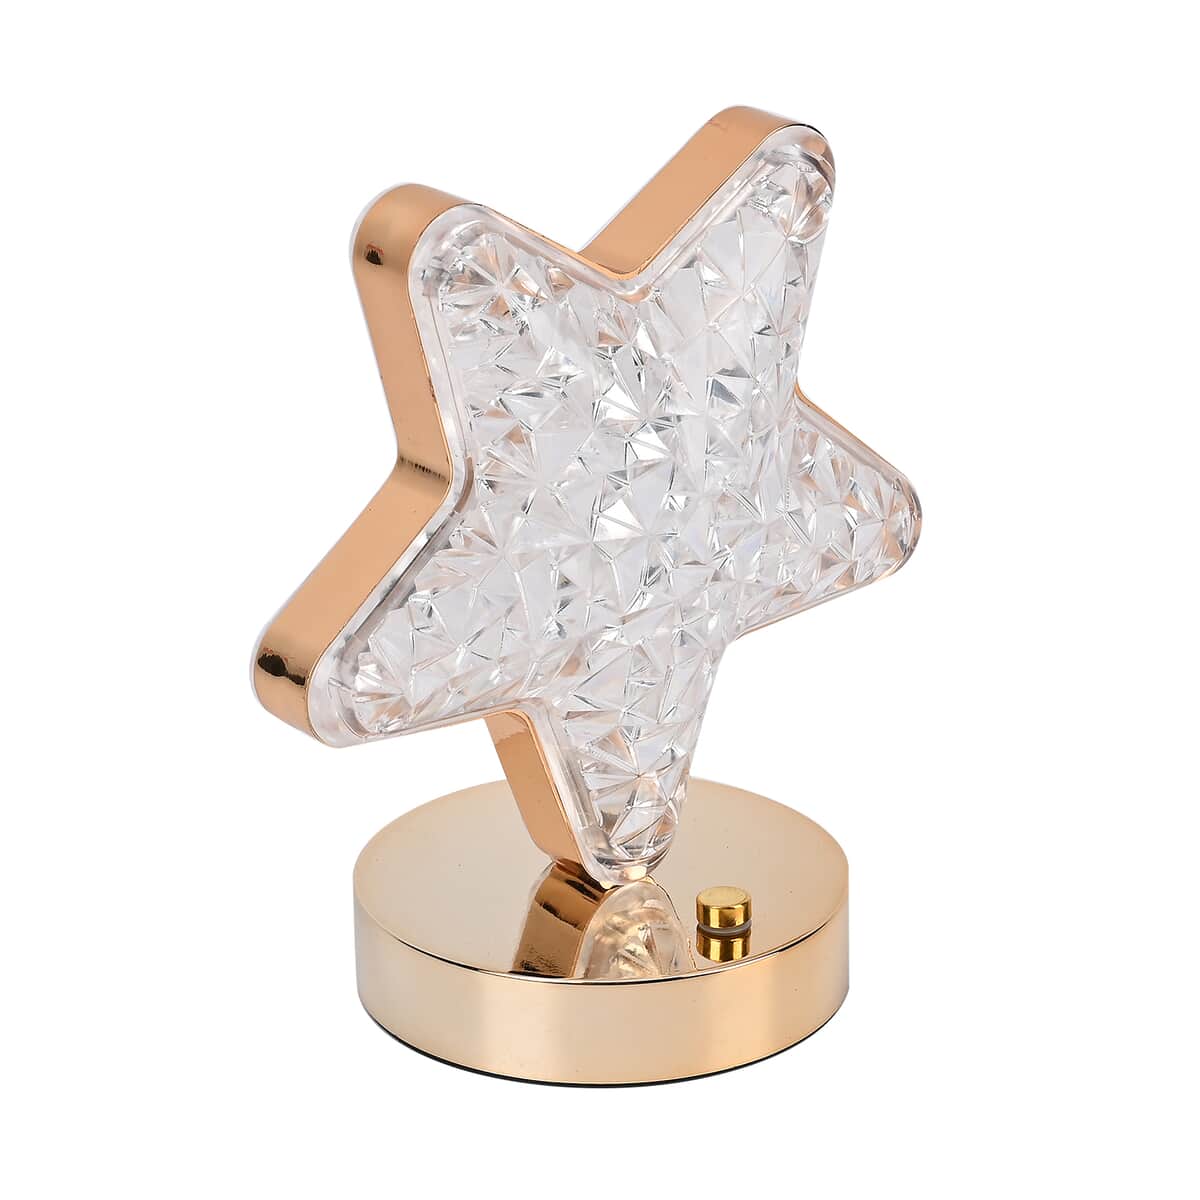 Touch Controlled Star-shaped Crystal Table Lamp image number 3